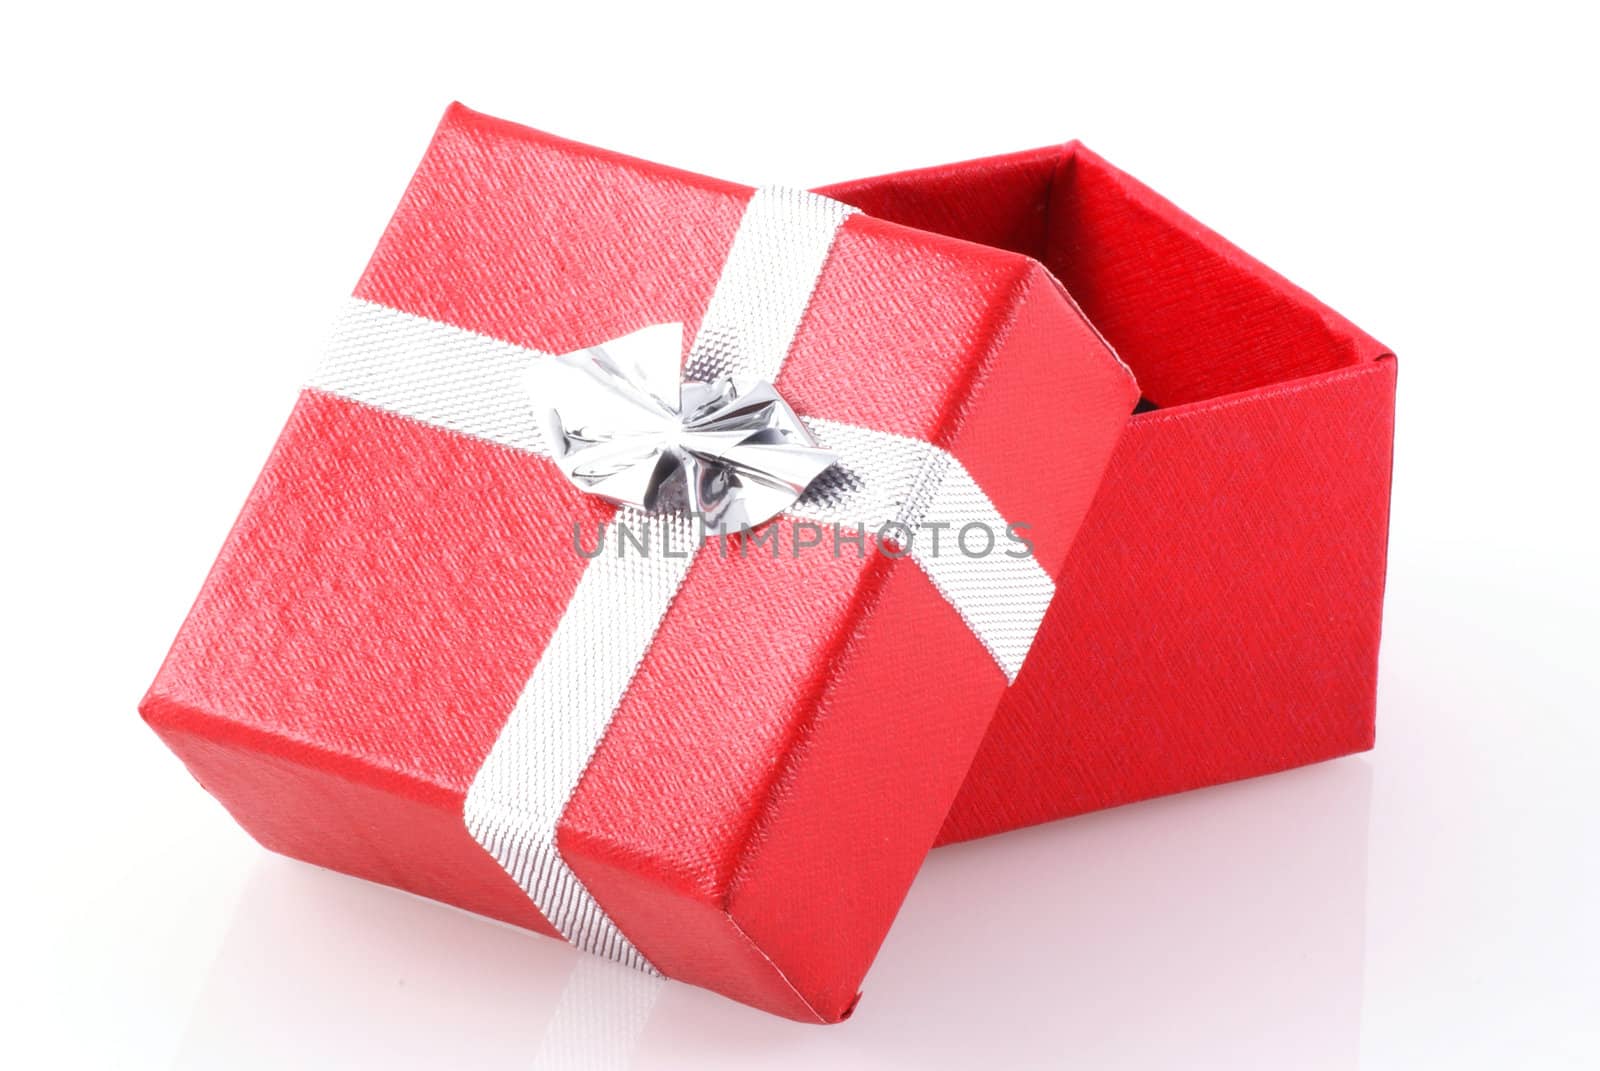 Red gift box with silver ribbon isolated on white.